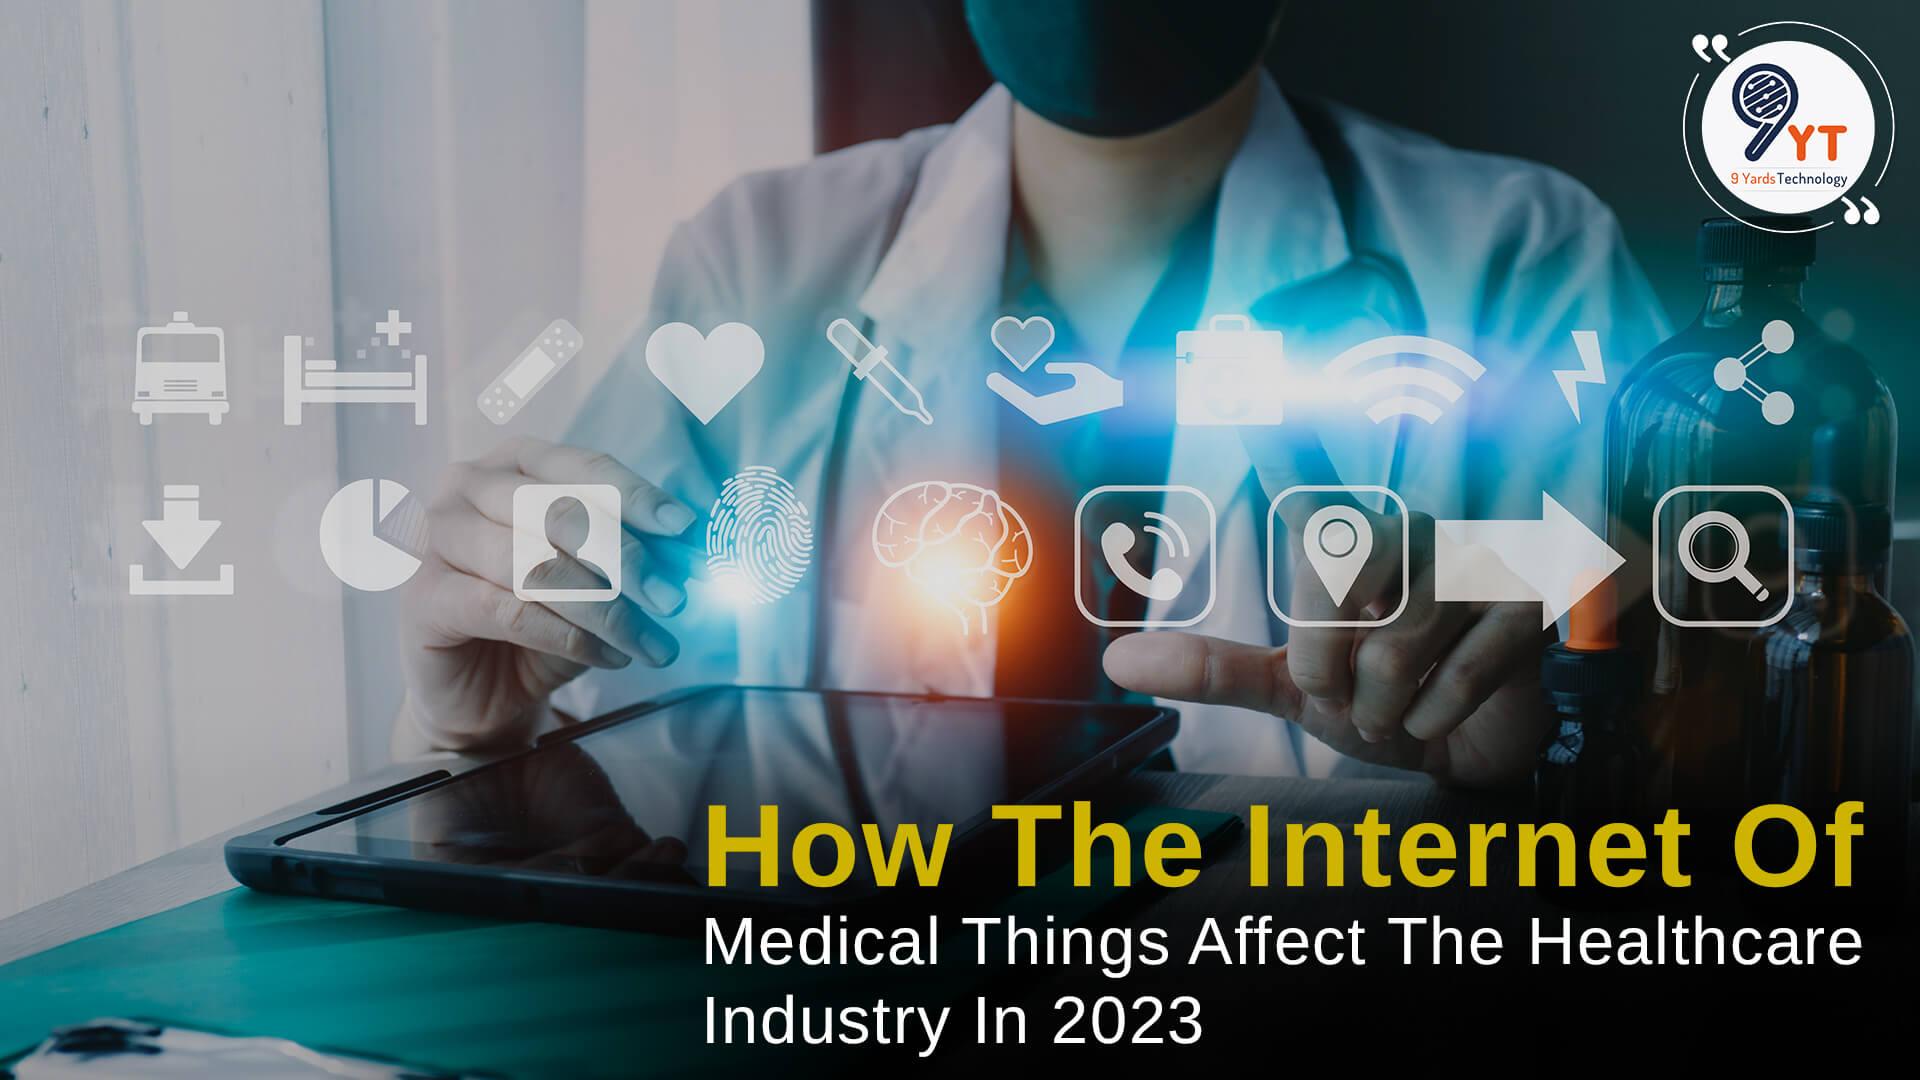 How The Internet Of Medical Things Affect The Healthcare Industry In 2023?